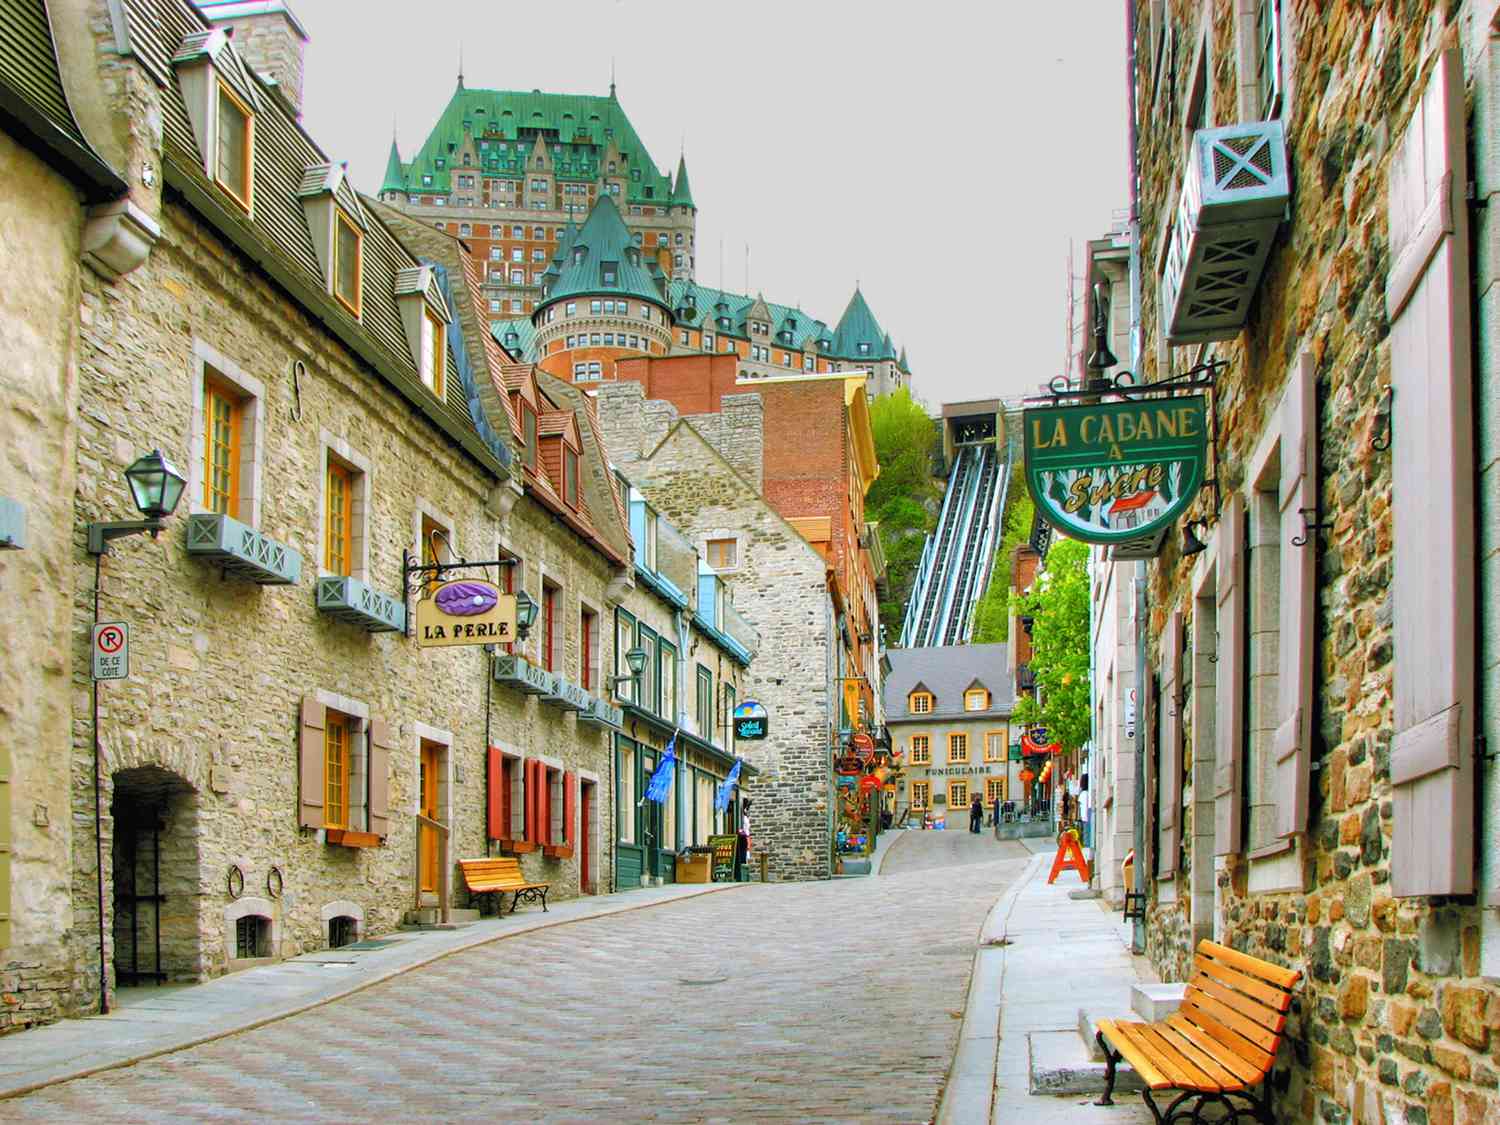 3 day tour Quebec City, Montreal and Ottawa $339